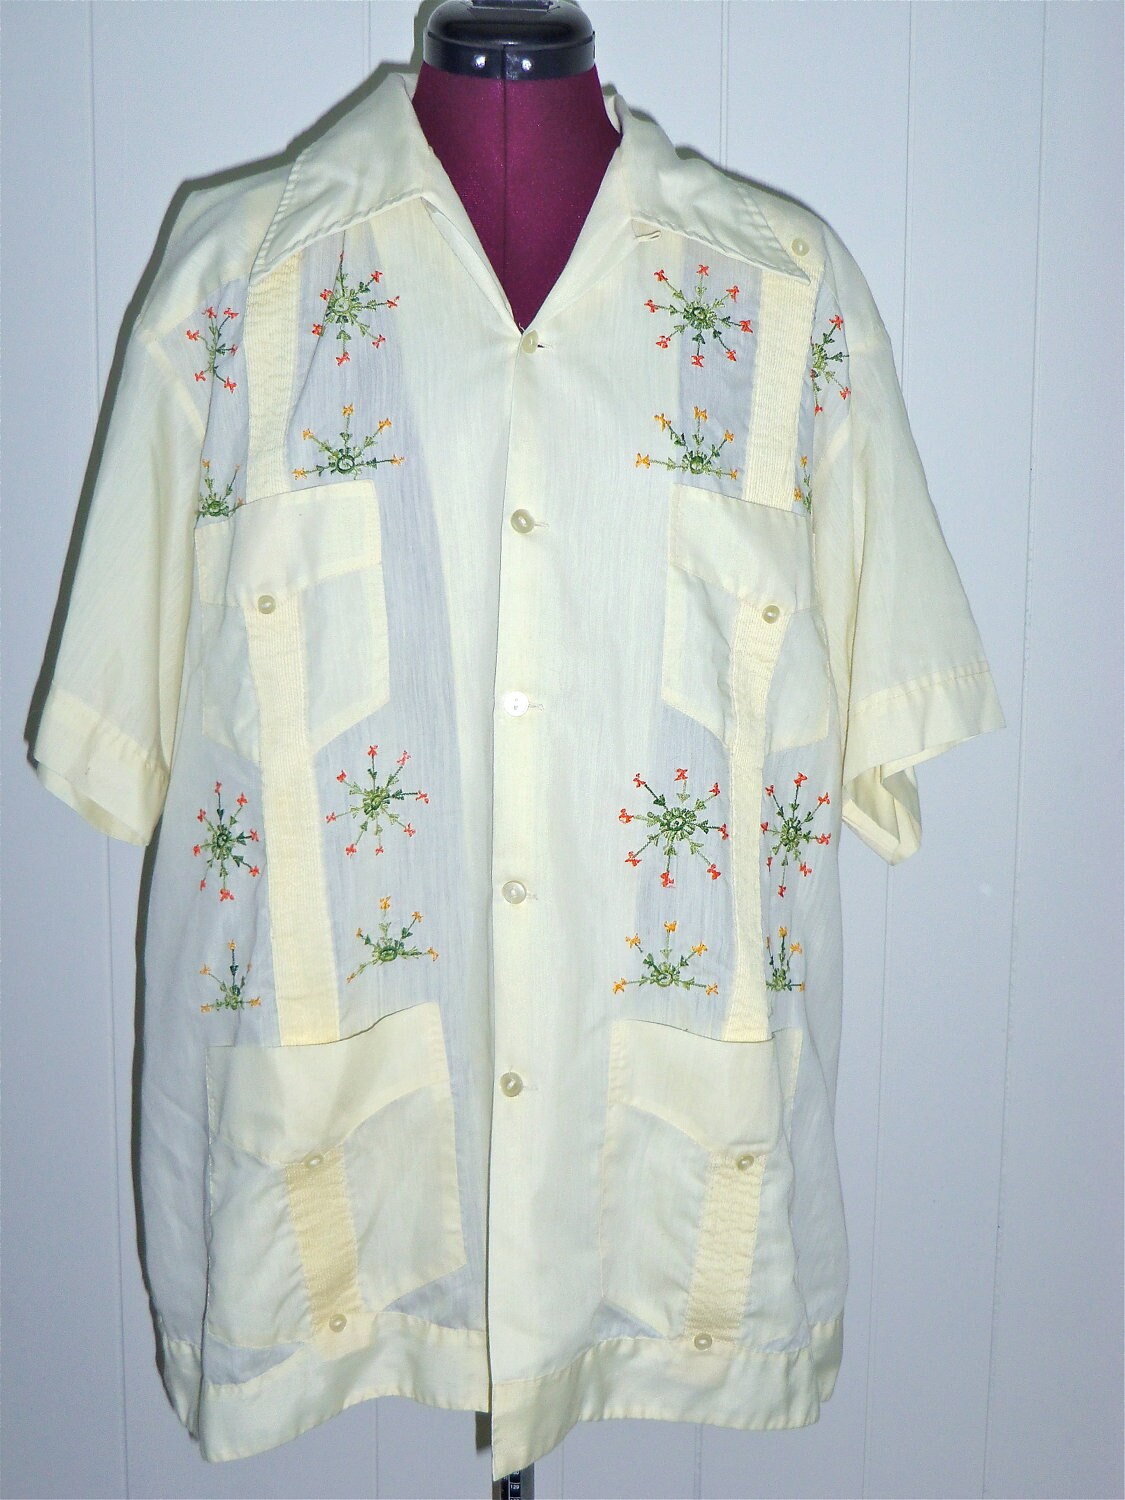 1970s Vintage Mexican Wedding Shirt Guayabera by Mario size